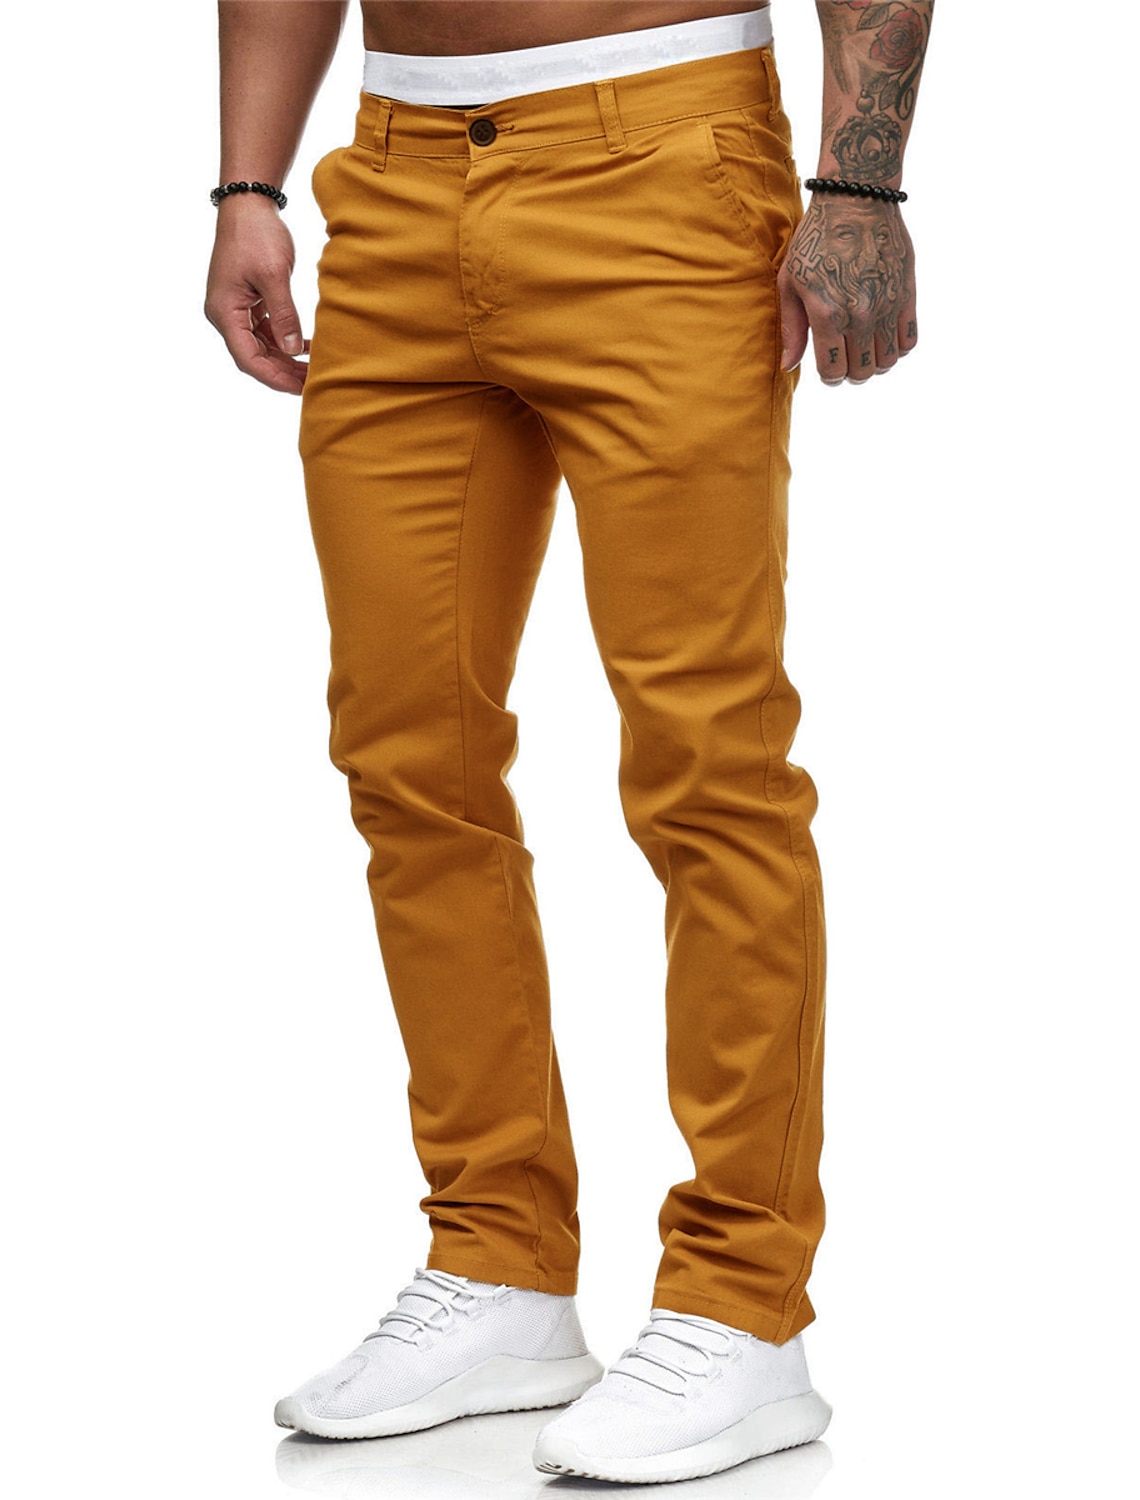 for Men Zaful Synthetic Solid Color Drawstring Casual Pants in Light Coffee Slacks and Chinos Casual trousers and trousers Brown Mens Clothing Trousers 